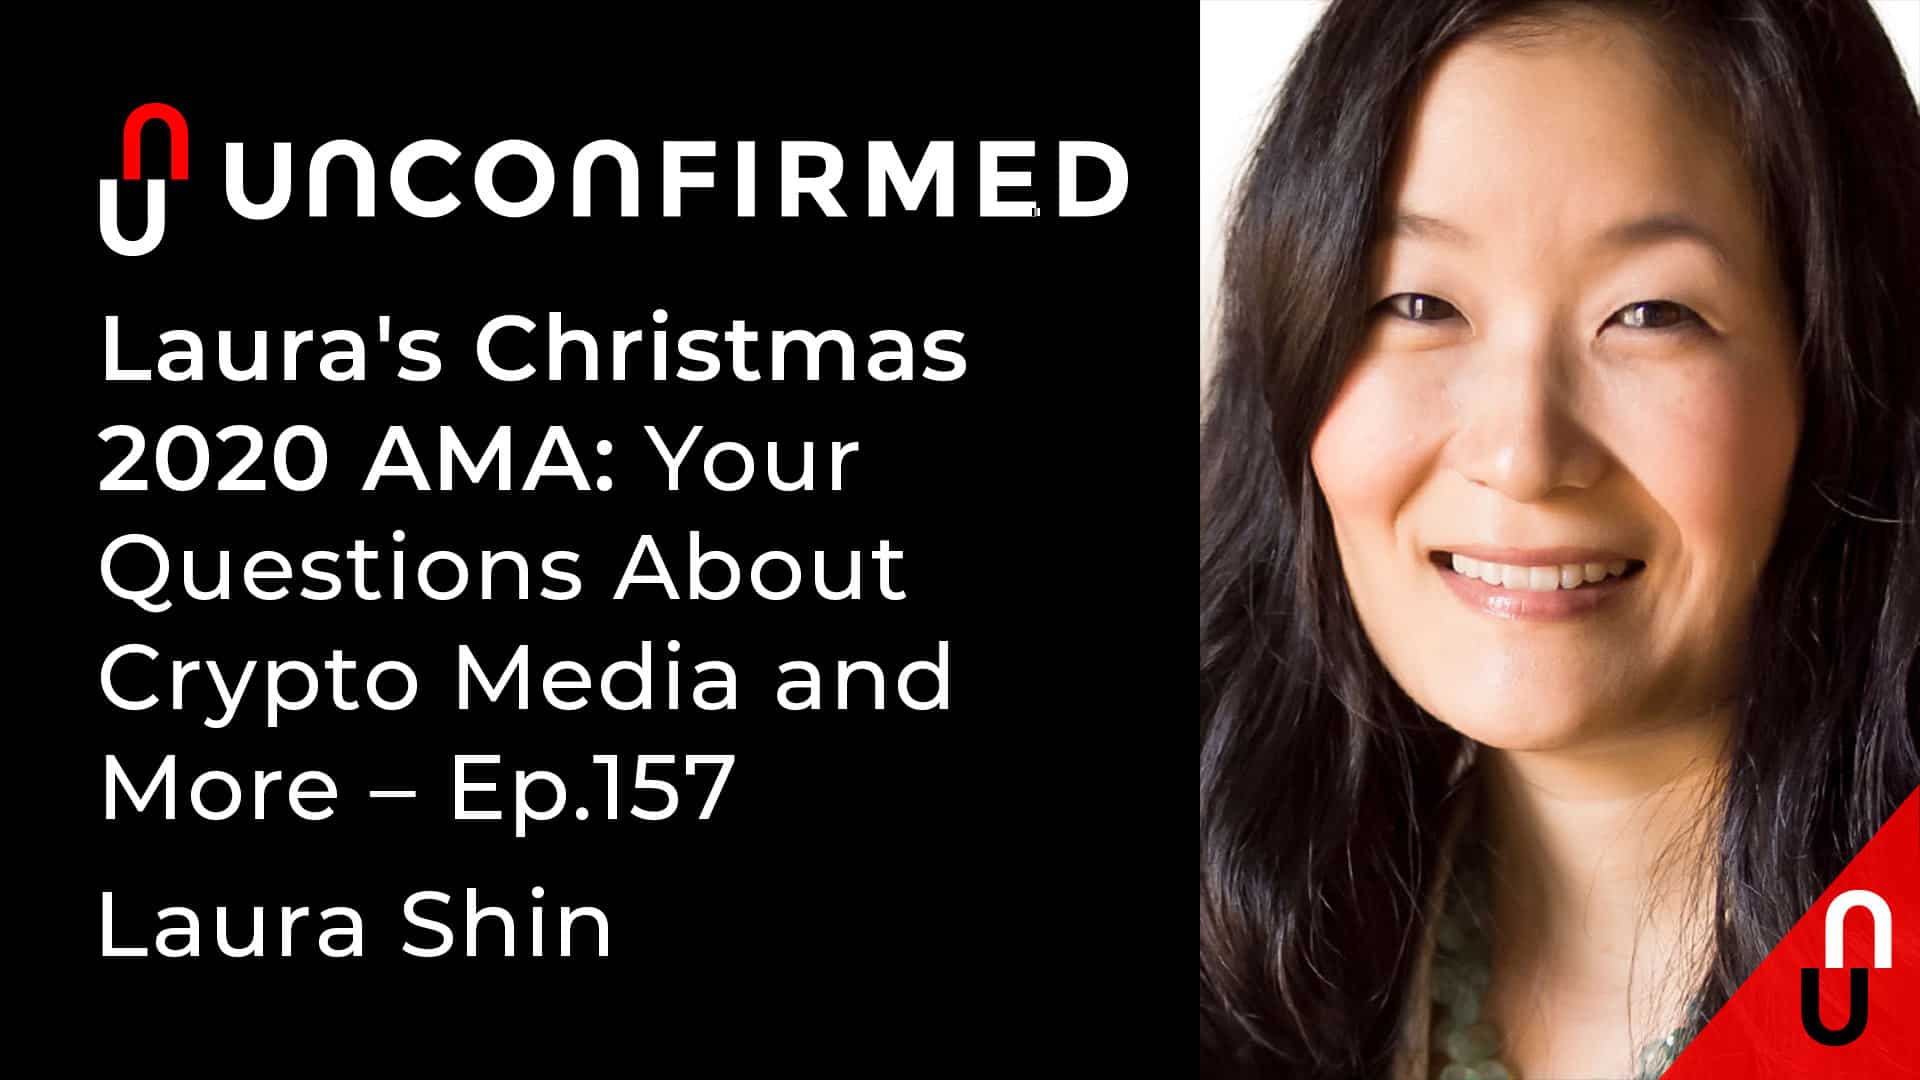 Unconfirmed - Ep.157 - Laura's Christmas 2020 AMA - Your Questions About Crypto Media and More